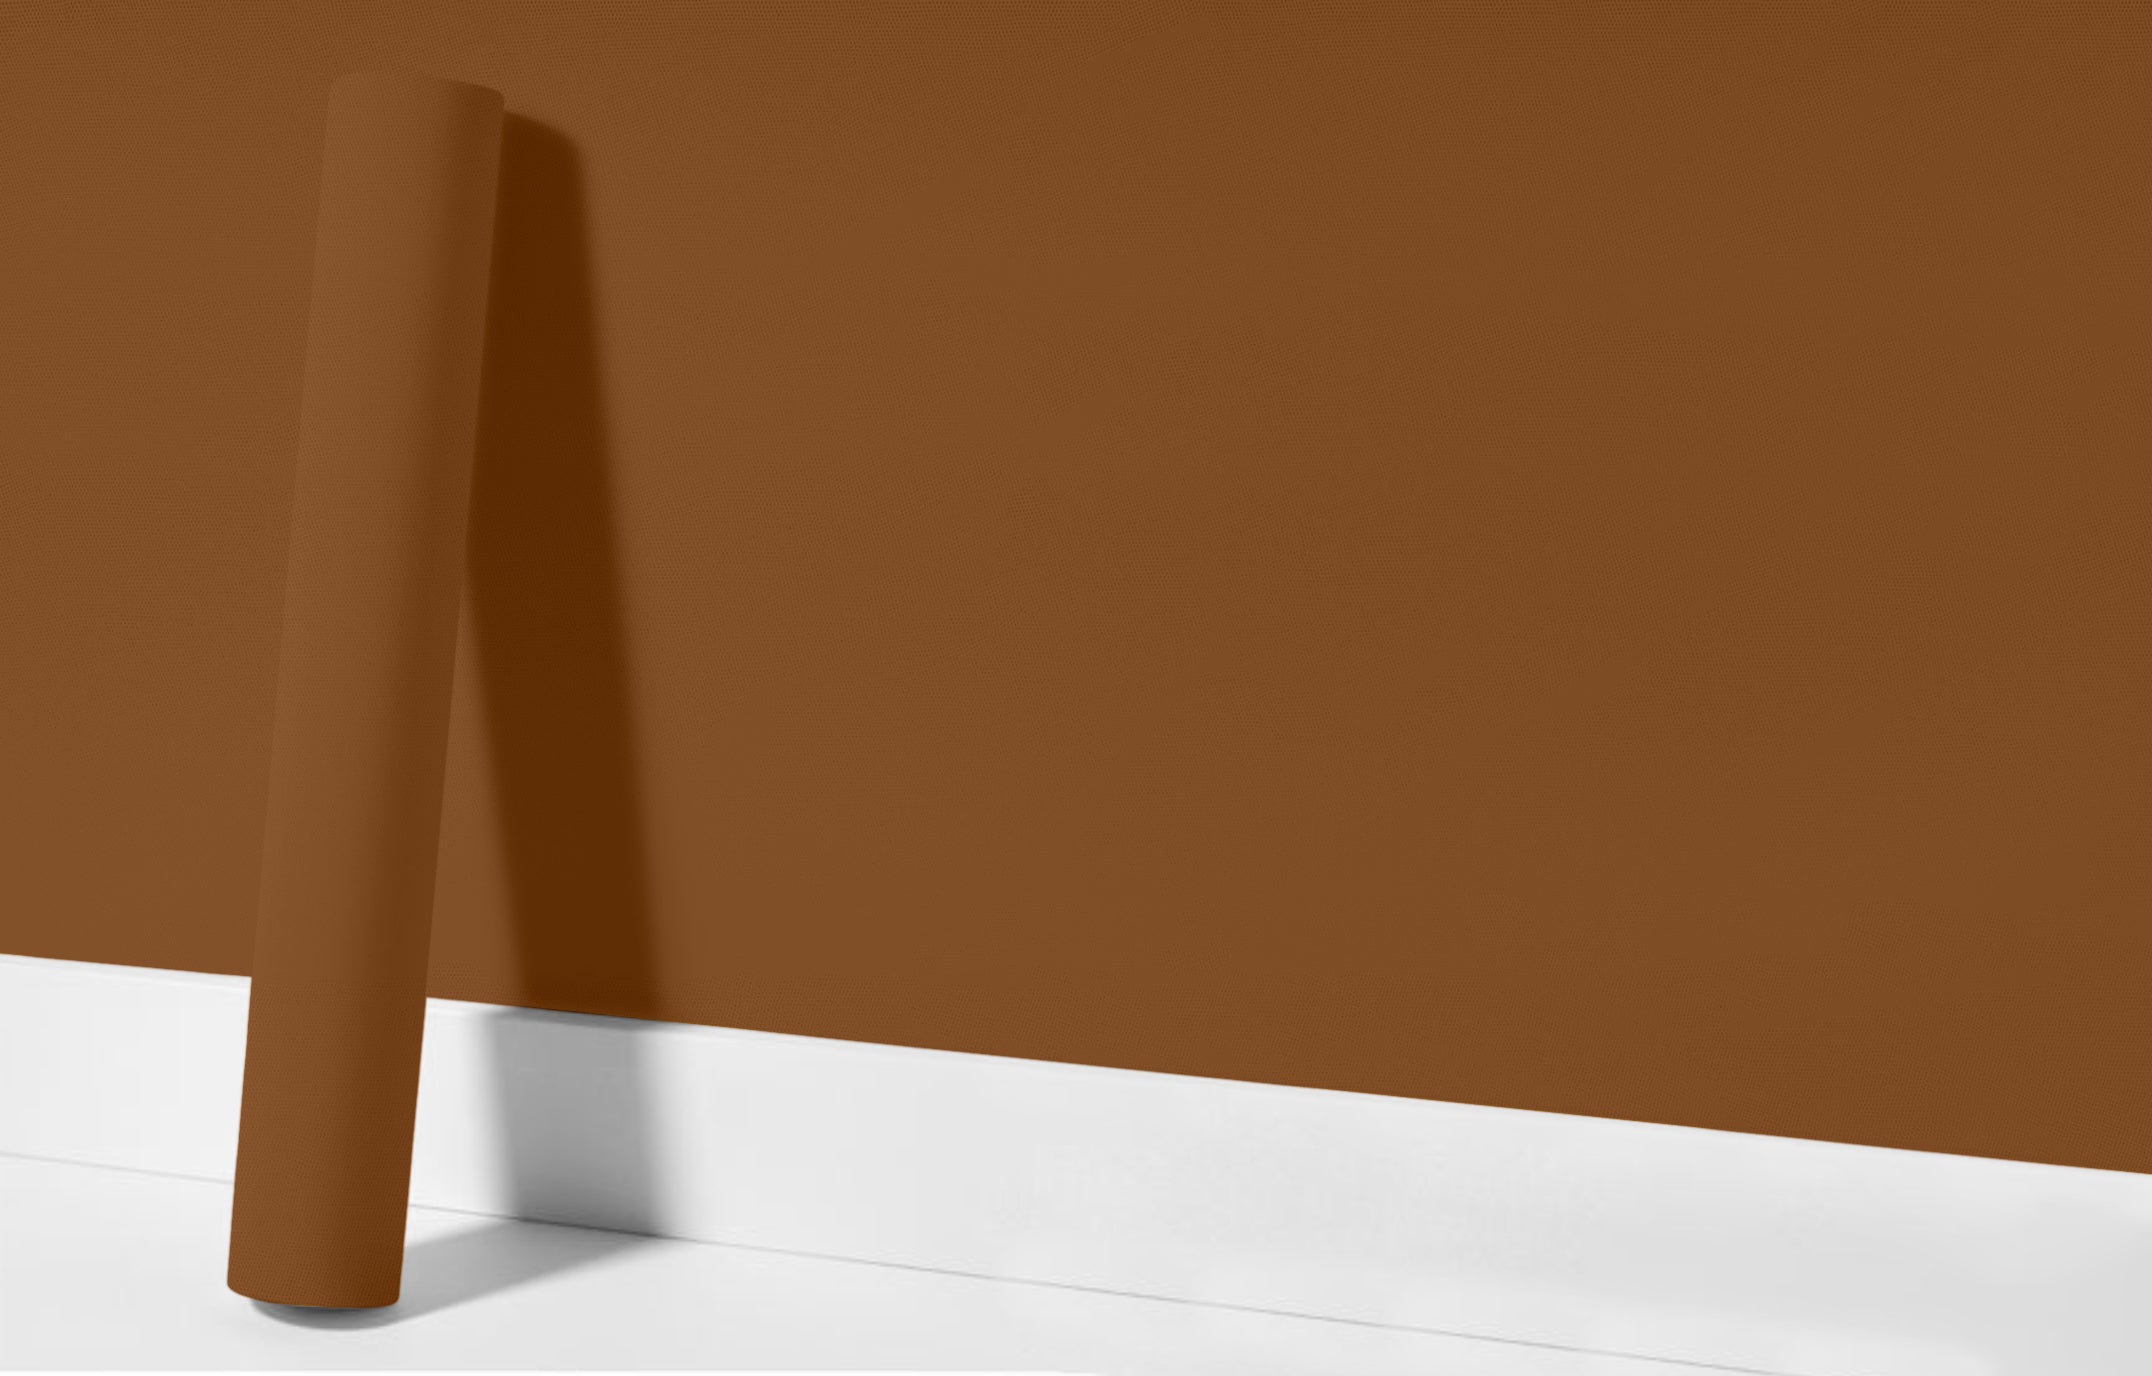 Peel & Stick Removable Re-usable Paint - Color RAL 8003 Clay Brown - offRAL™ - RALRAW LLC, USA